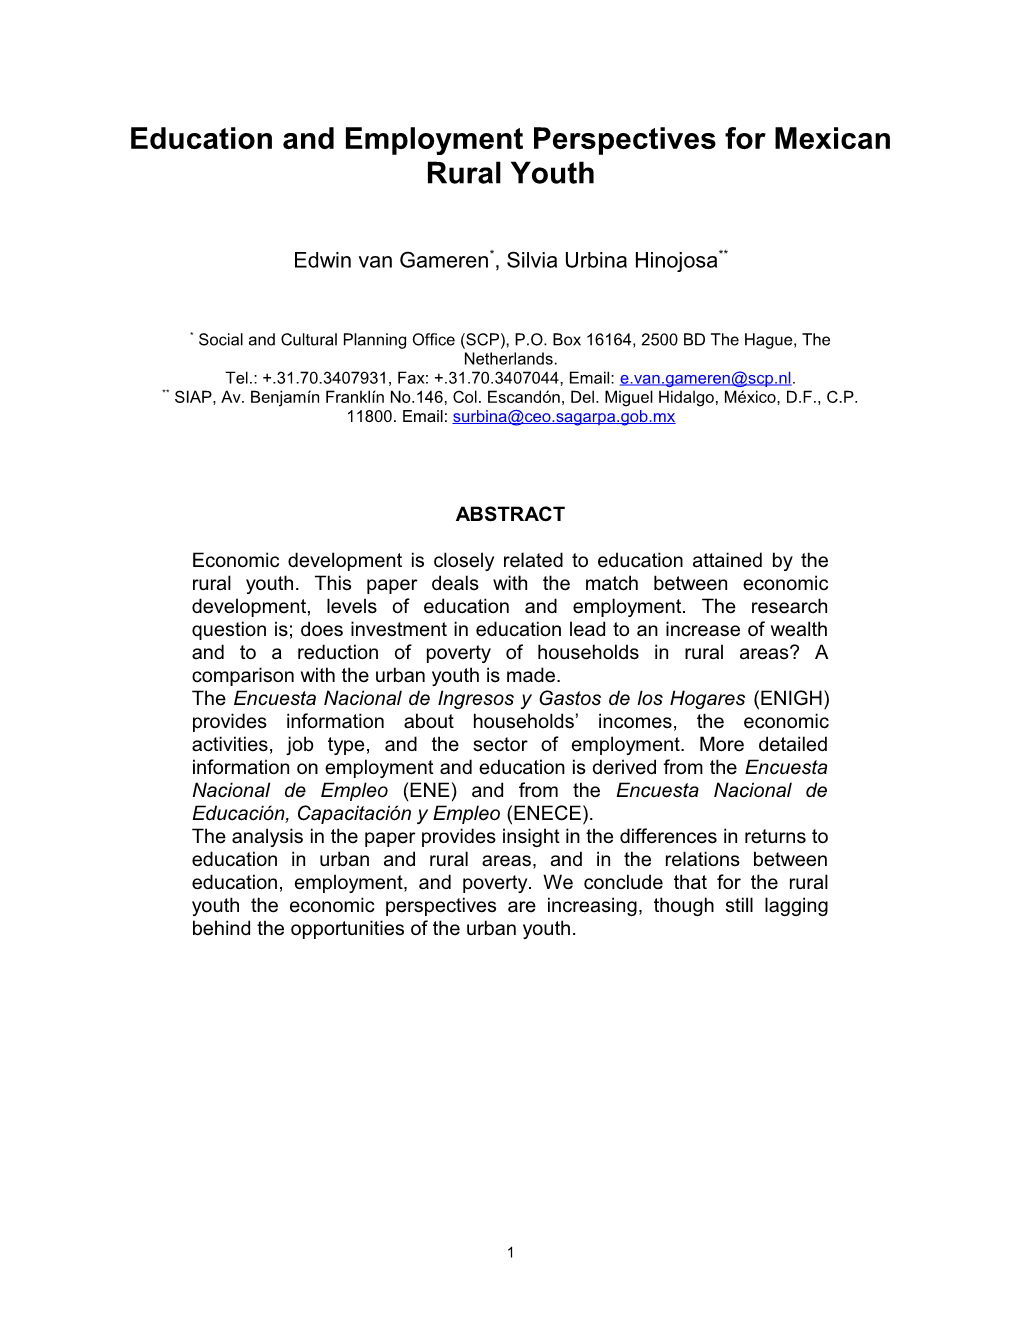 Education and Employment Perspectives for Mexican Rural Youth